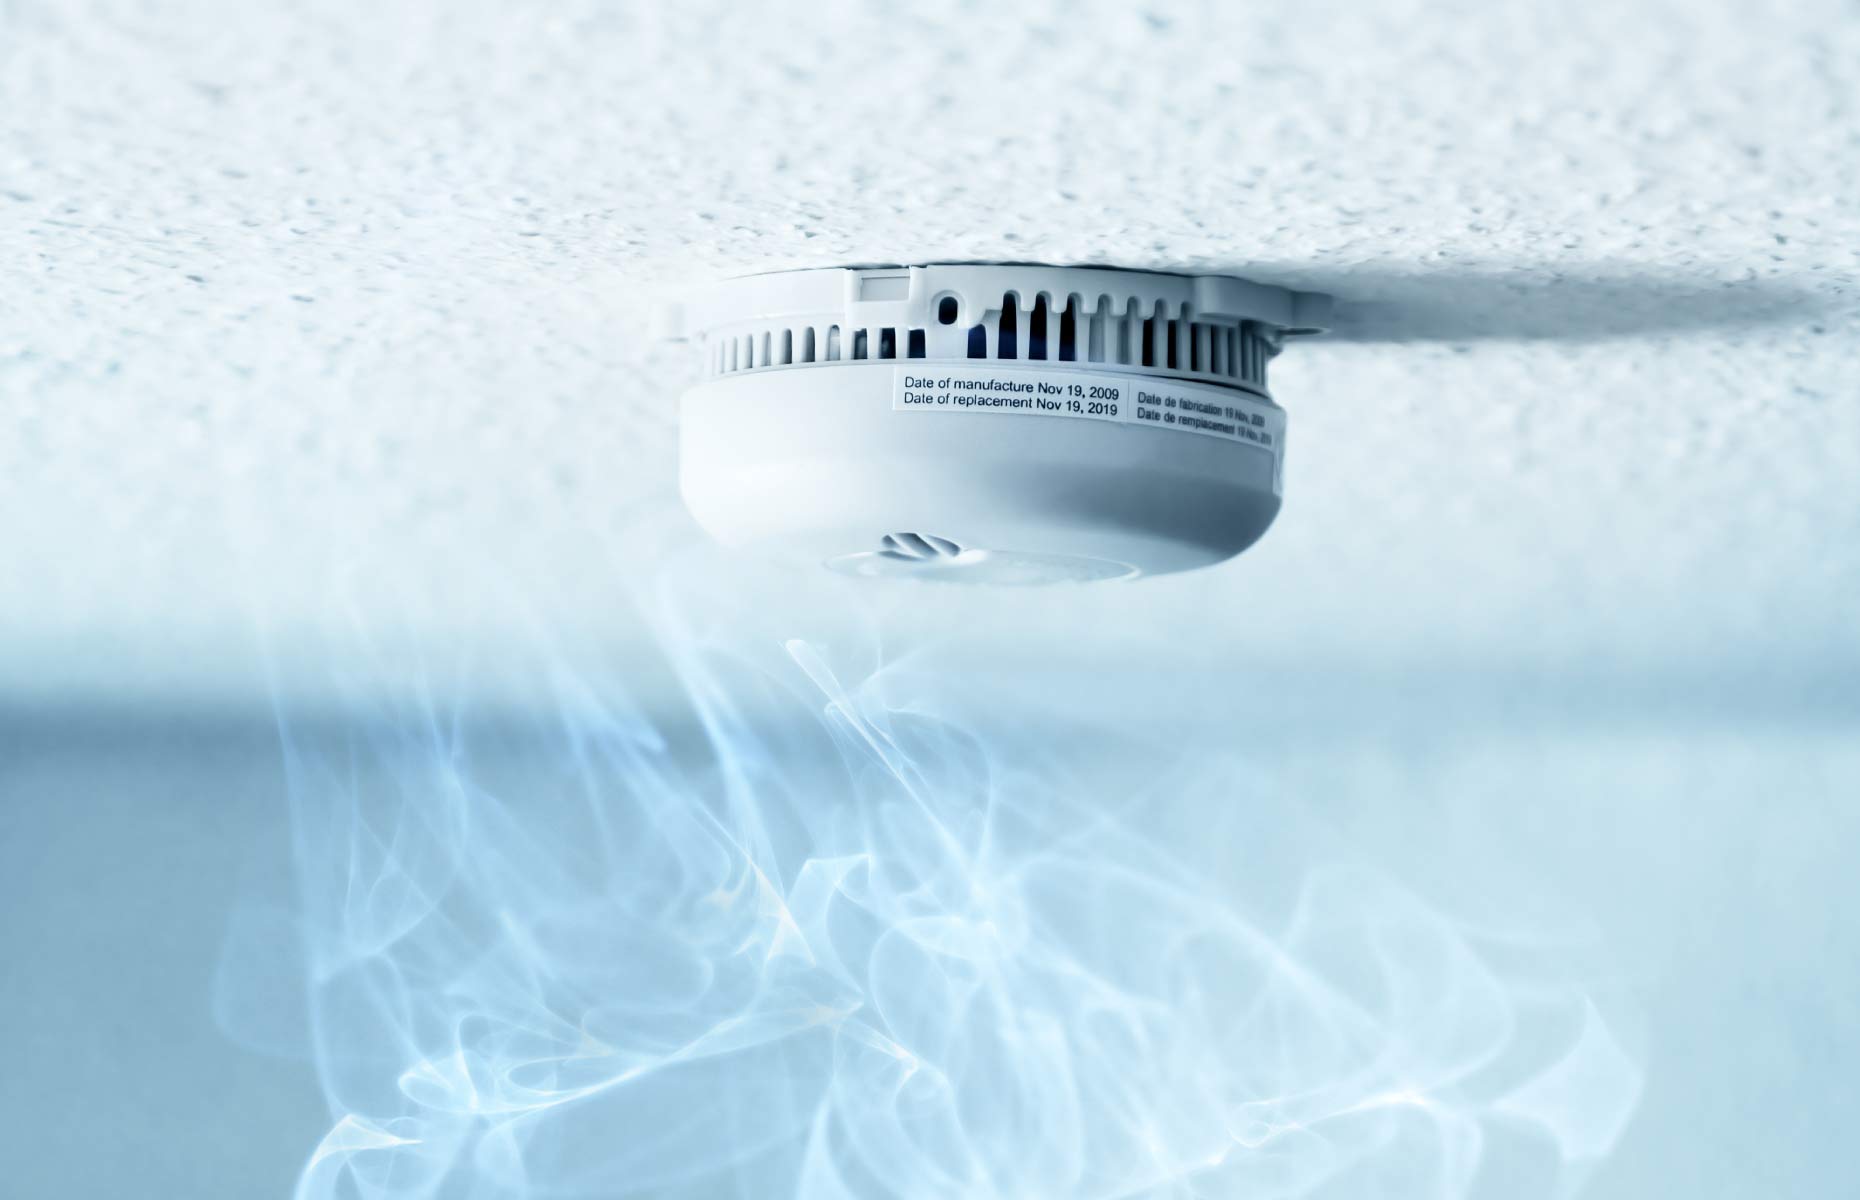 Keep on top of smoke alarm maitainance and change batteries as soon as they need it. Image: Shutterstock